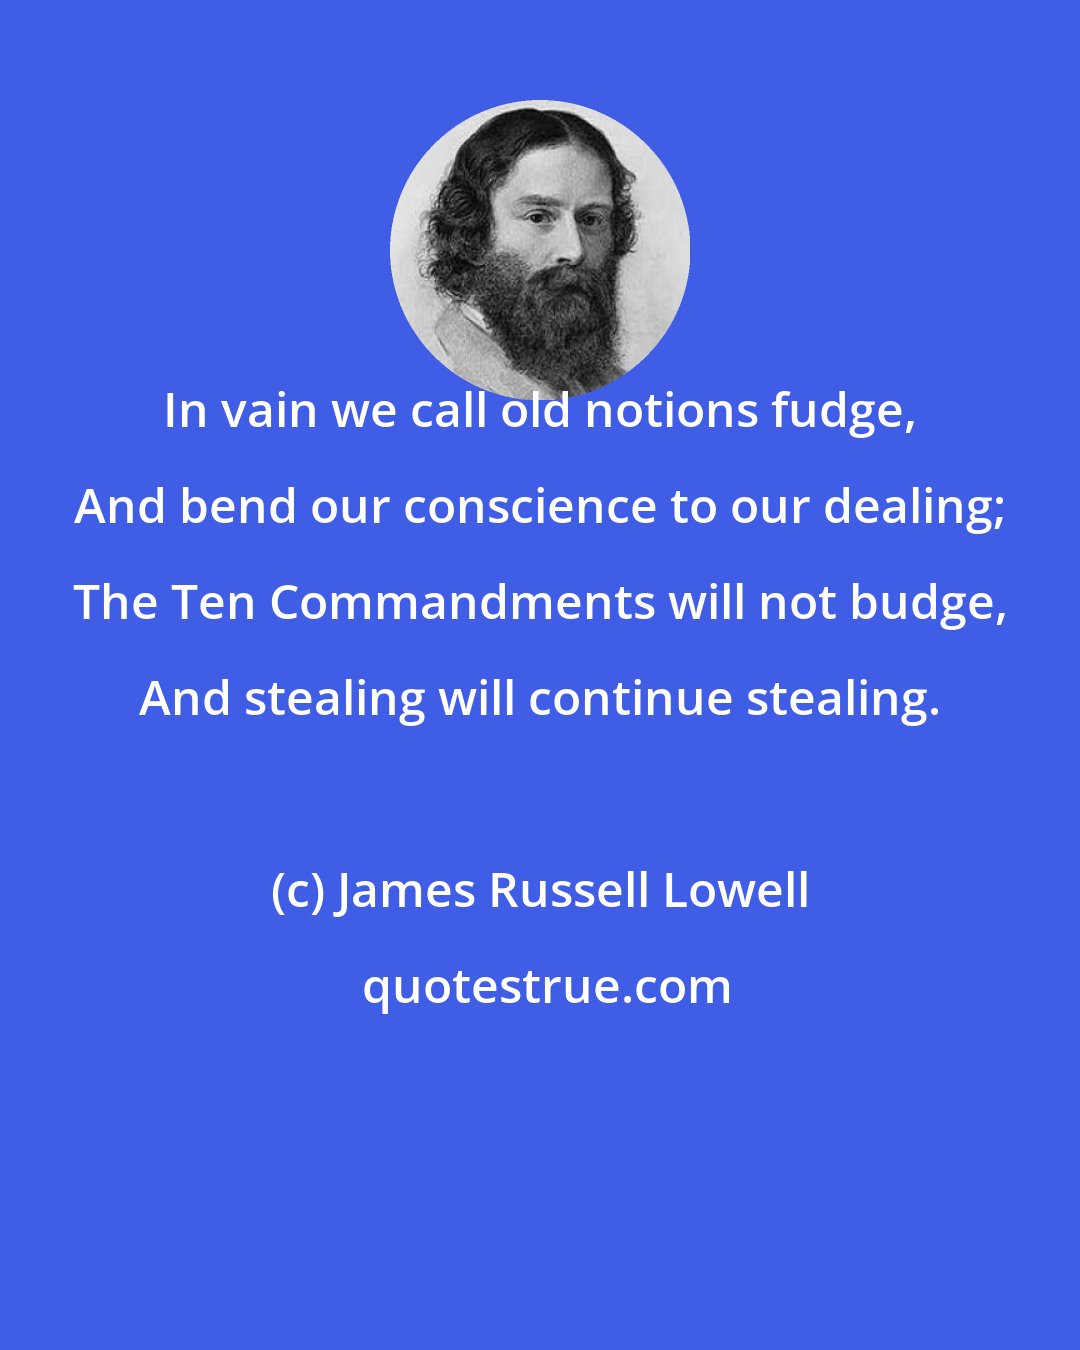 James Russell Lowell: In vain we call old notions fudge, And bend our conscience to our dealing; The Ten Commandments will not budge, And stealing will continue stealing.